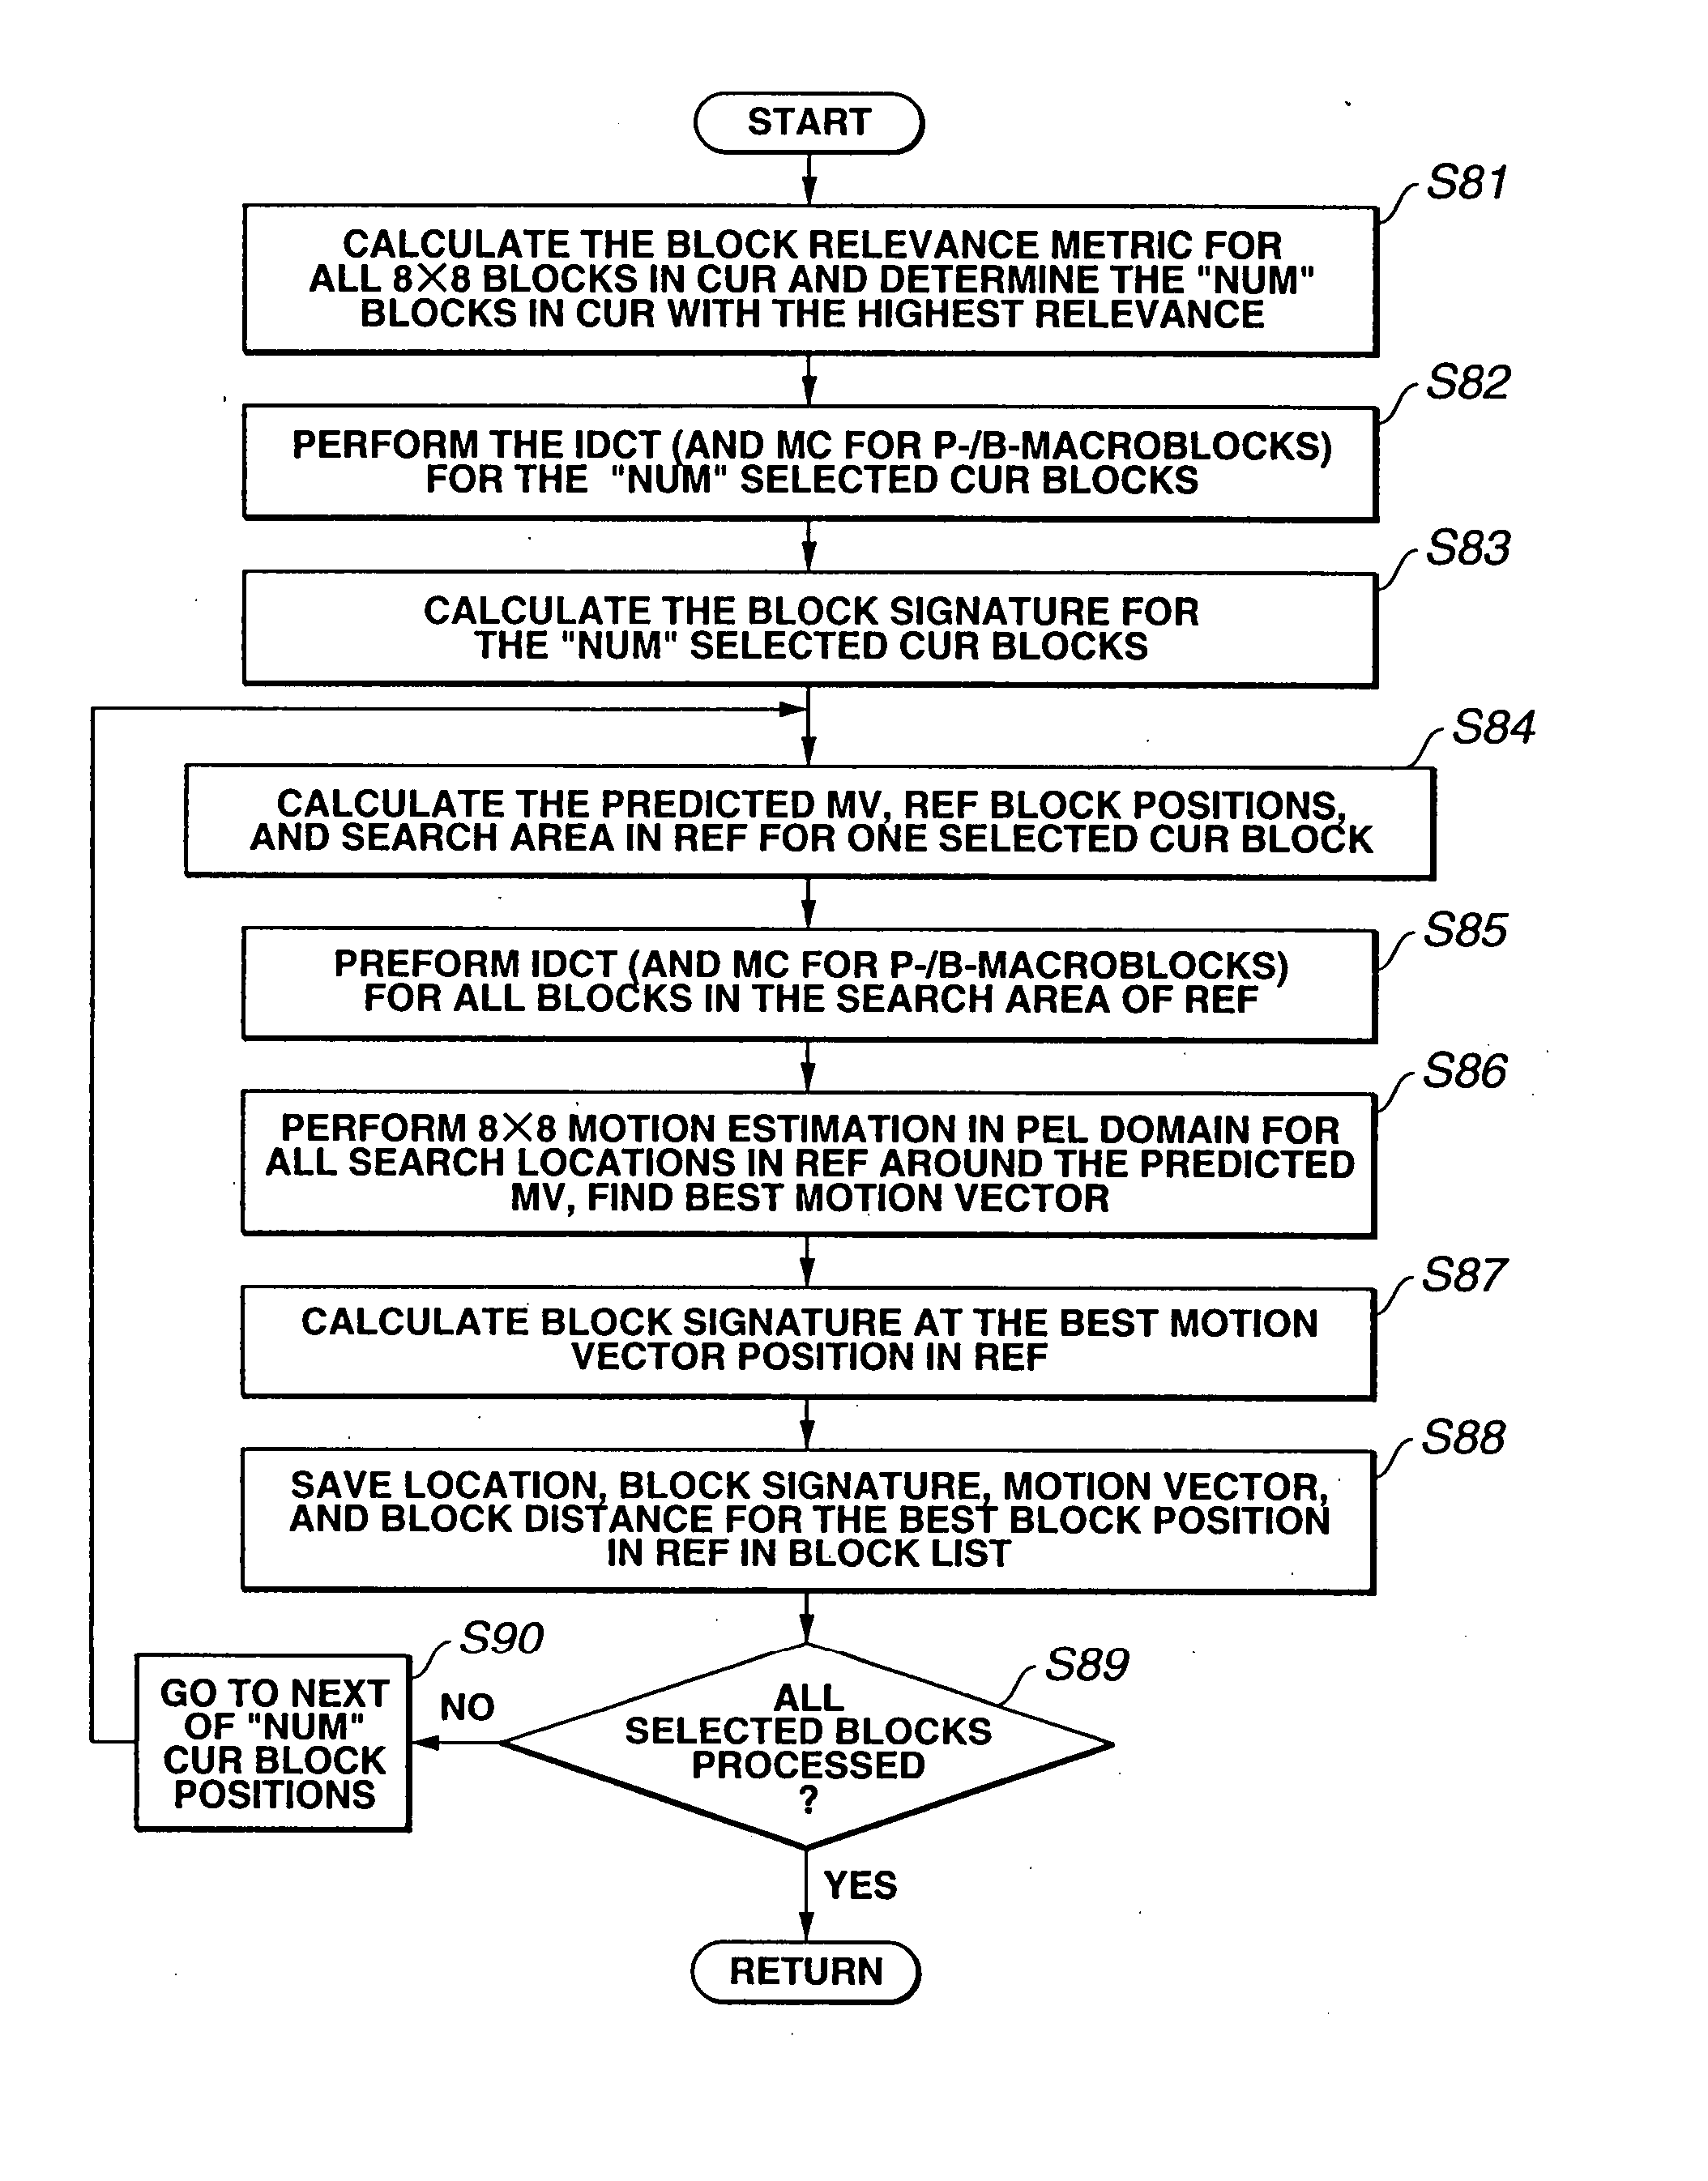 Video/audio signal processing method and video/audio signal processing apparatus